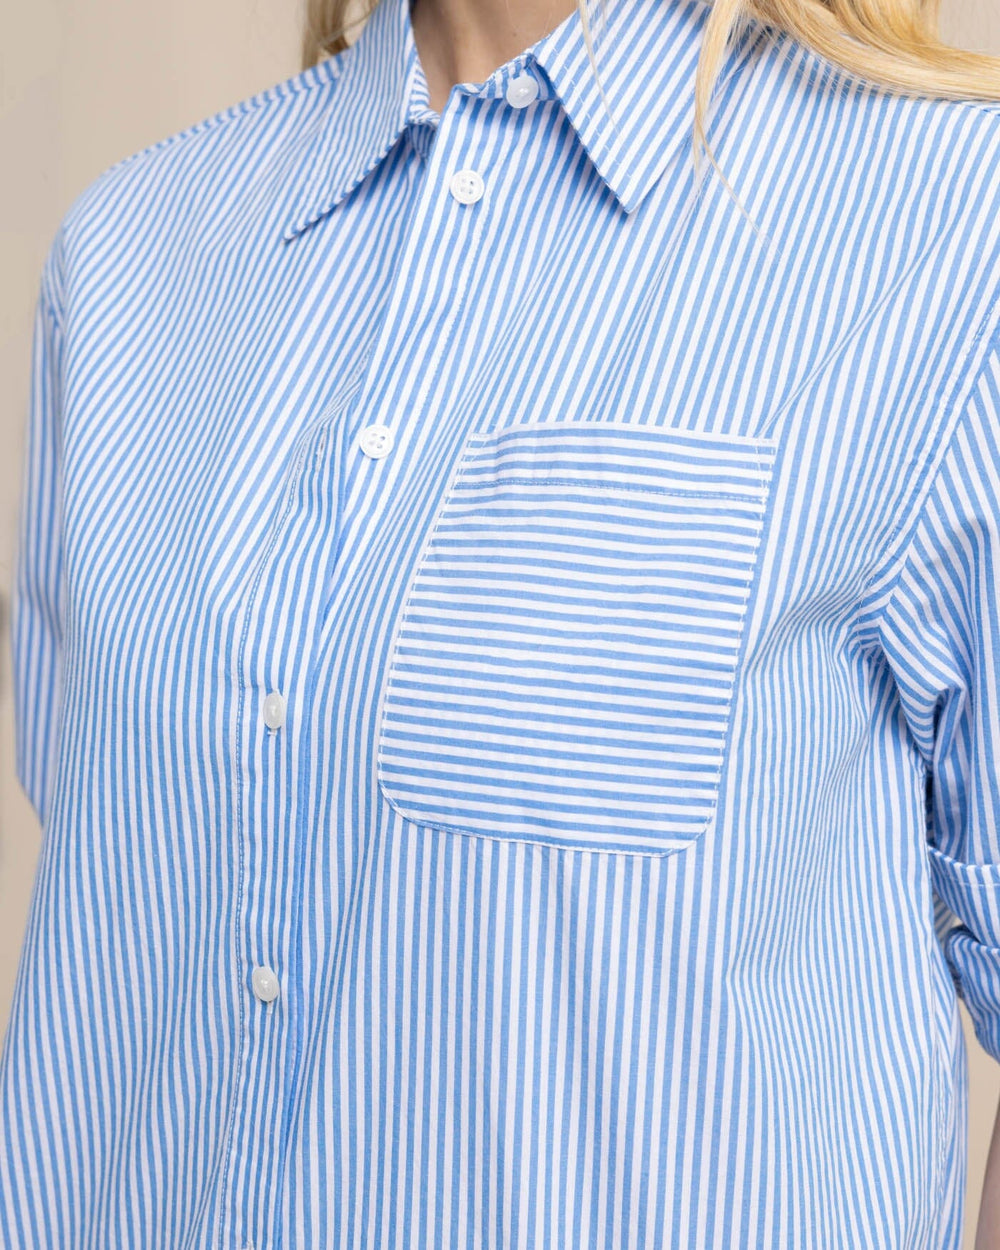 The detail view of the Southern Tide Katherine Stripe Shirt by Southern Tide - Blue Fin